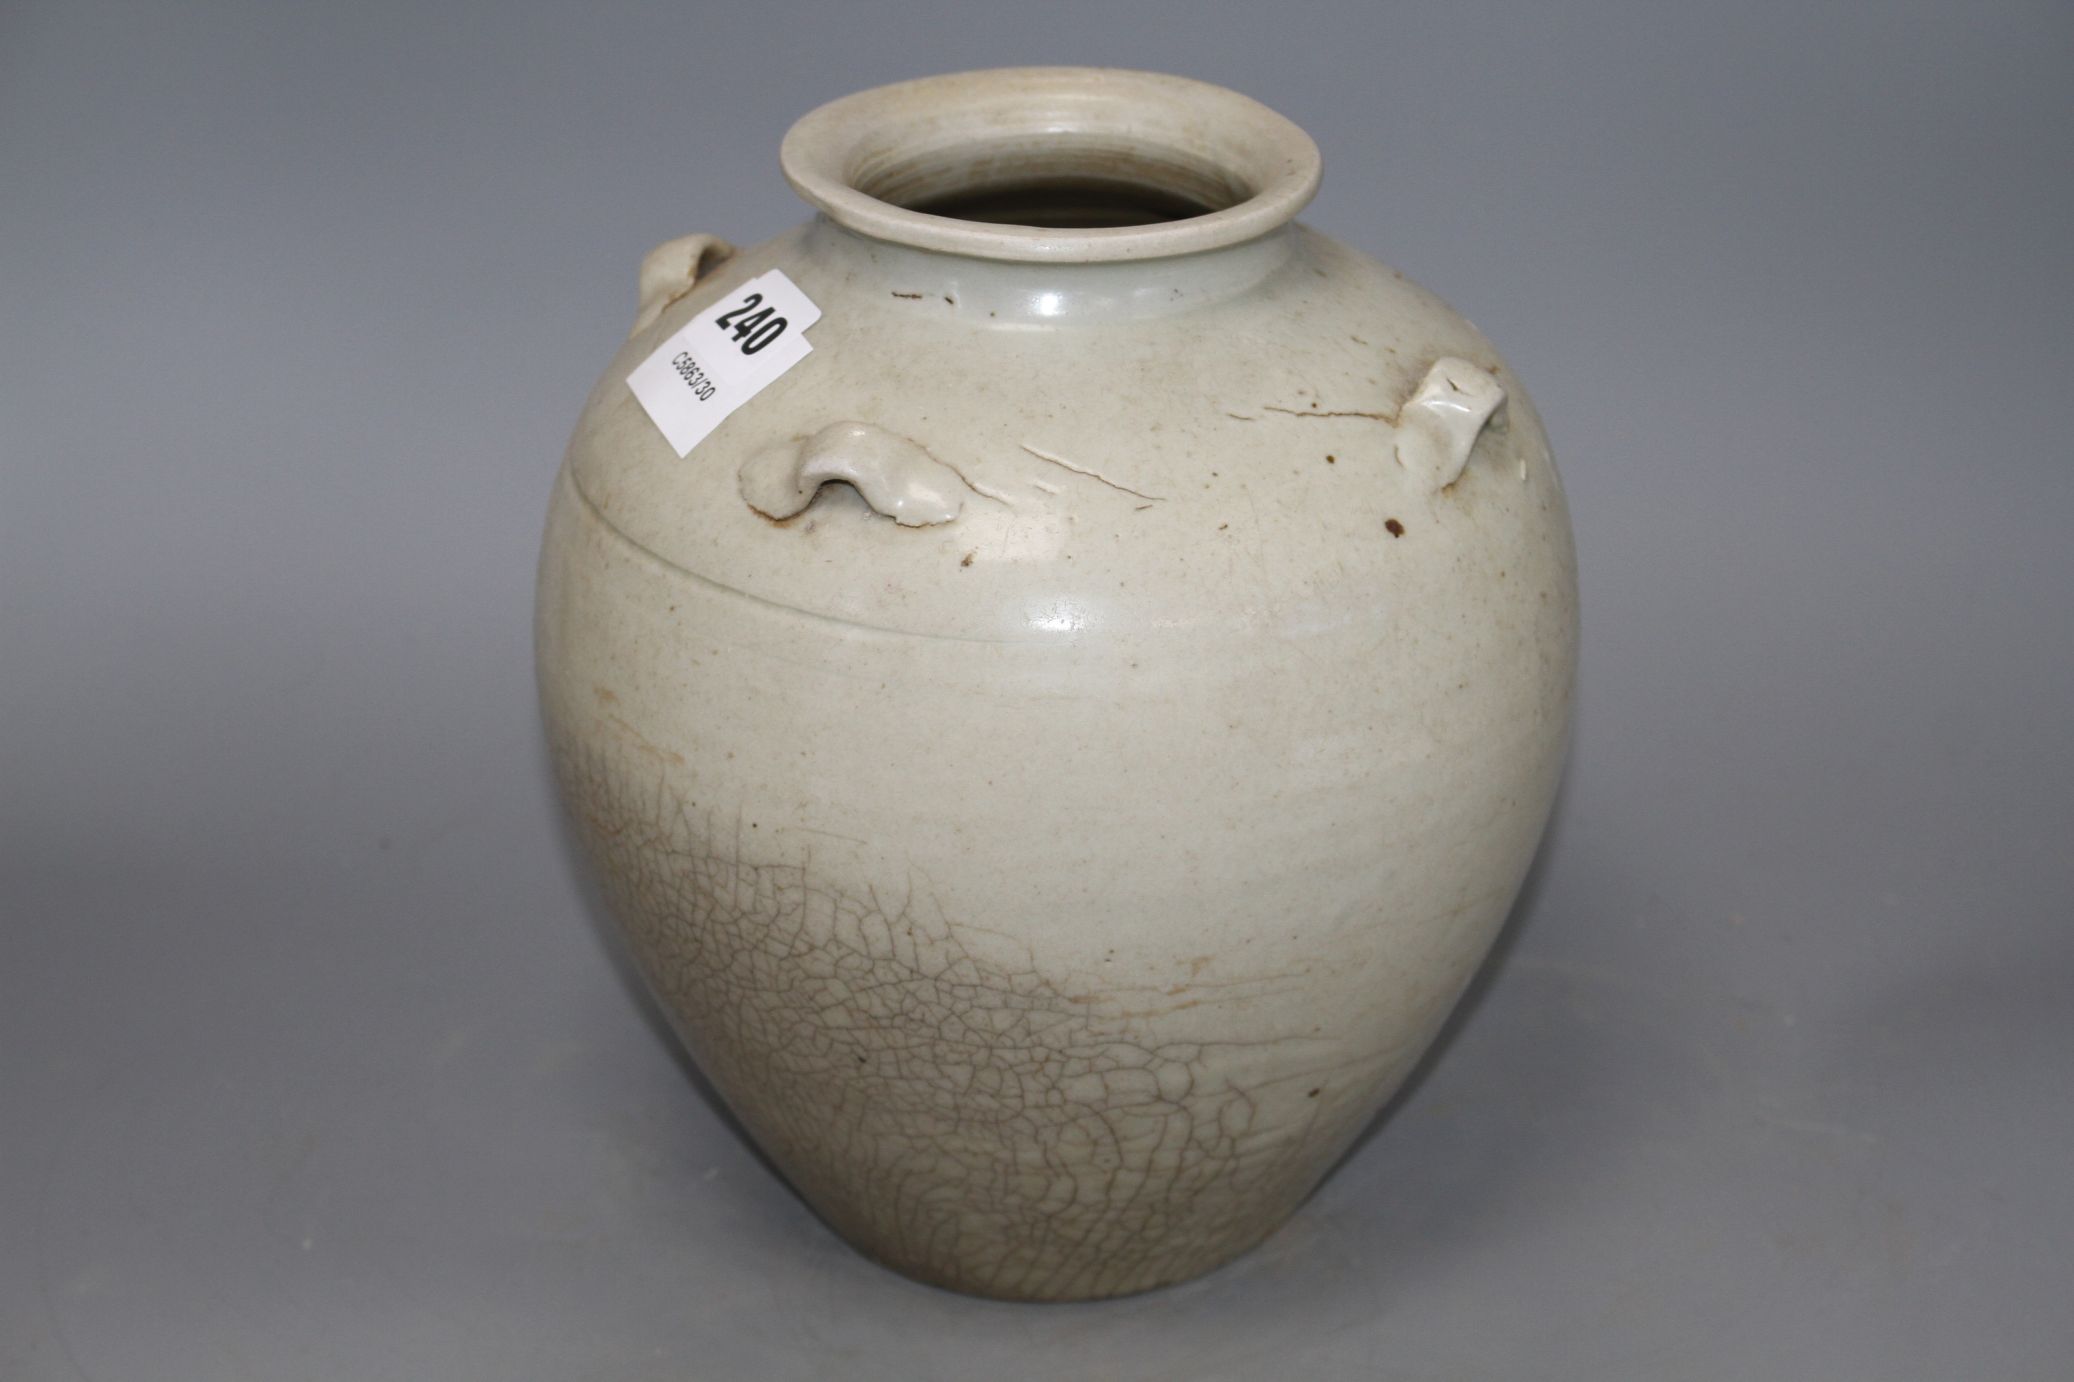 A Chinese Ding type vase, Ming dynasty or later, with loop handles, height 22cm Condition: Natural - Image 2 of 5